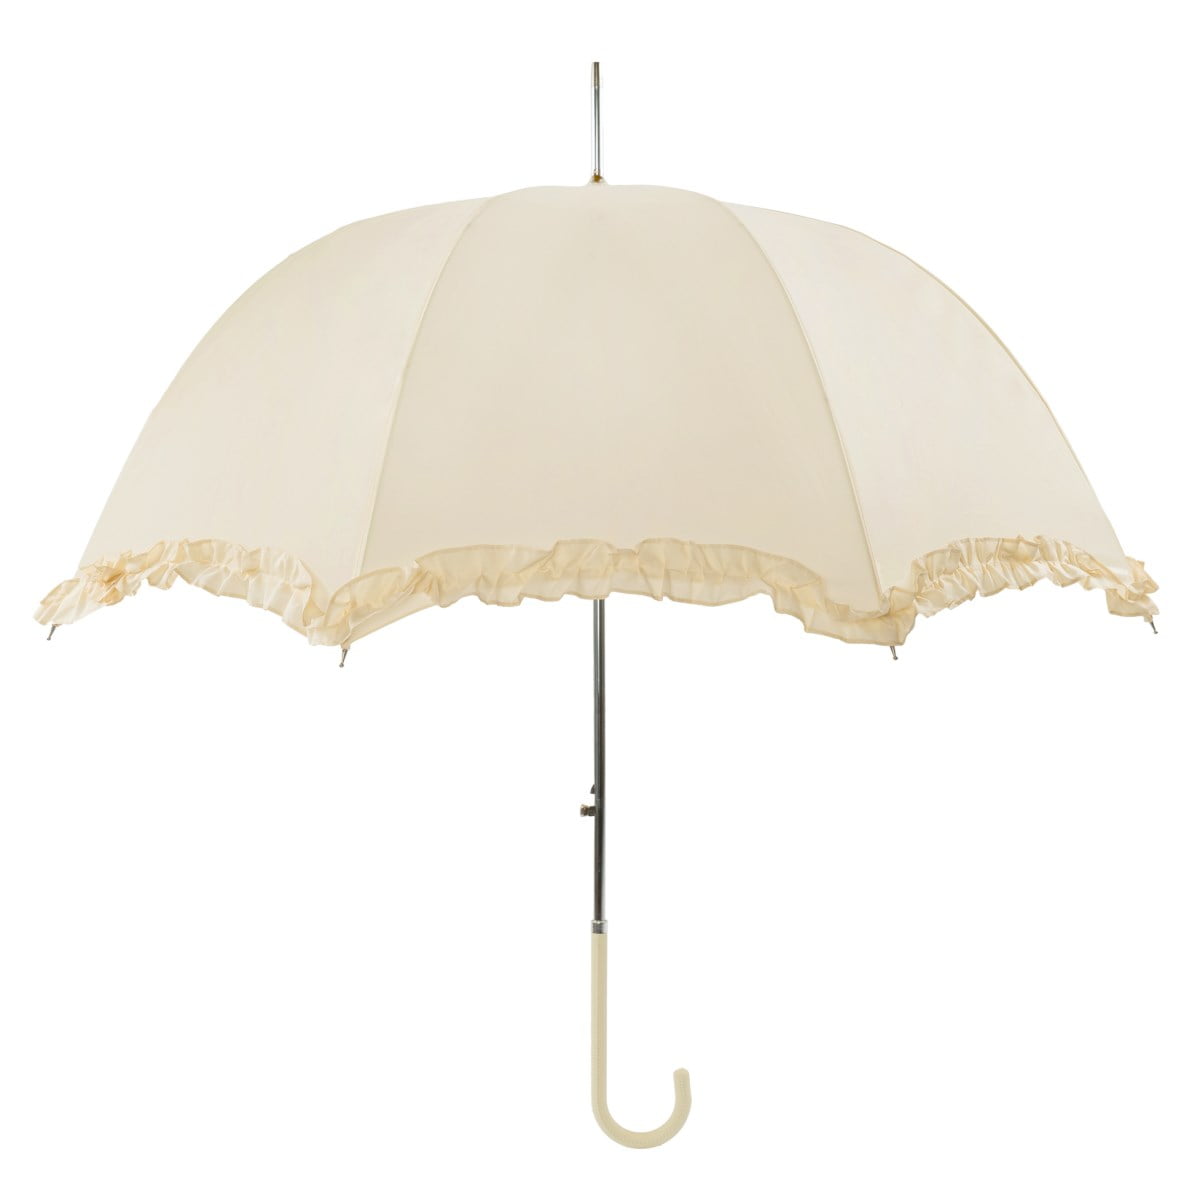 Ivory Frilled Umbrella with scalloped edge open, vertical